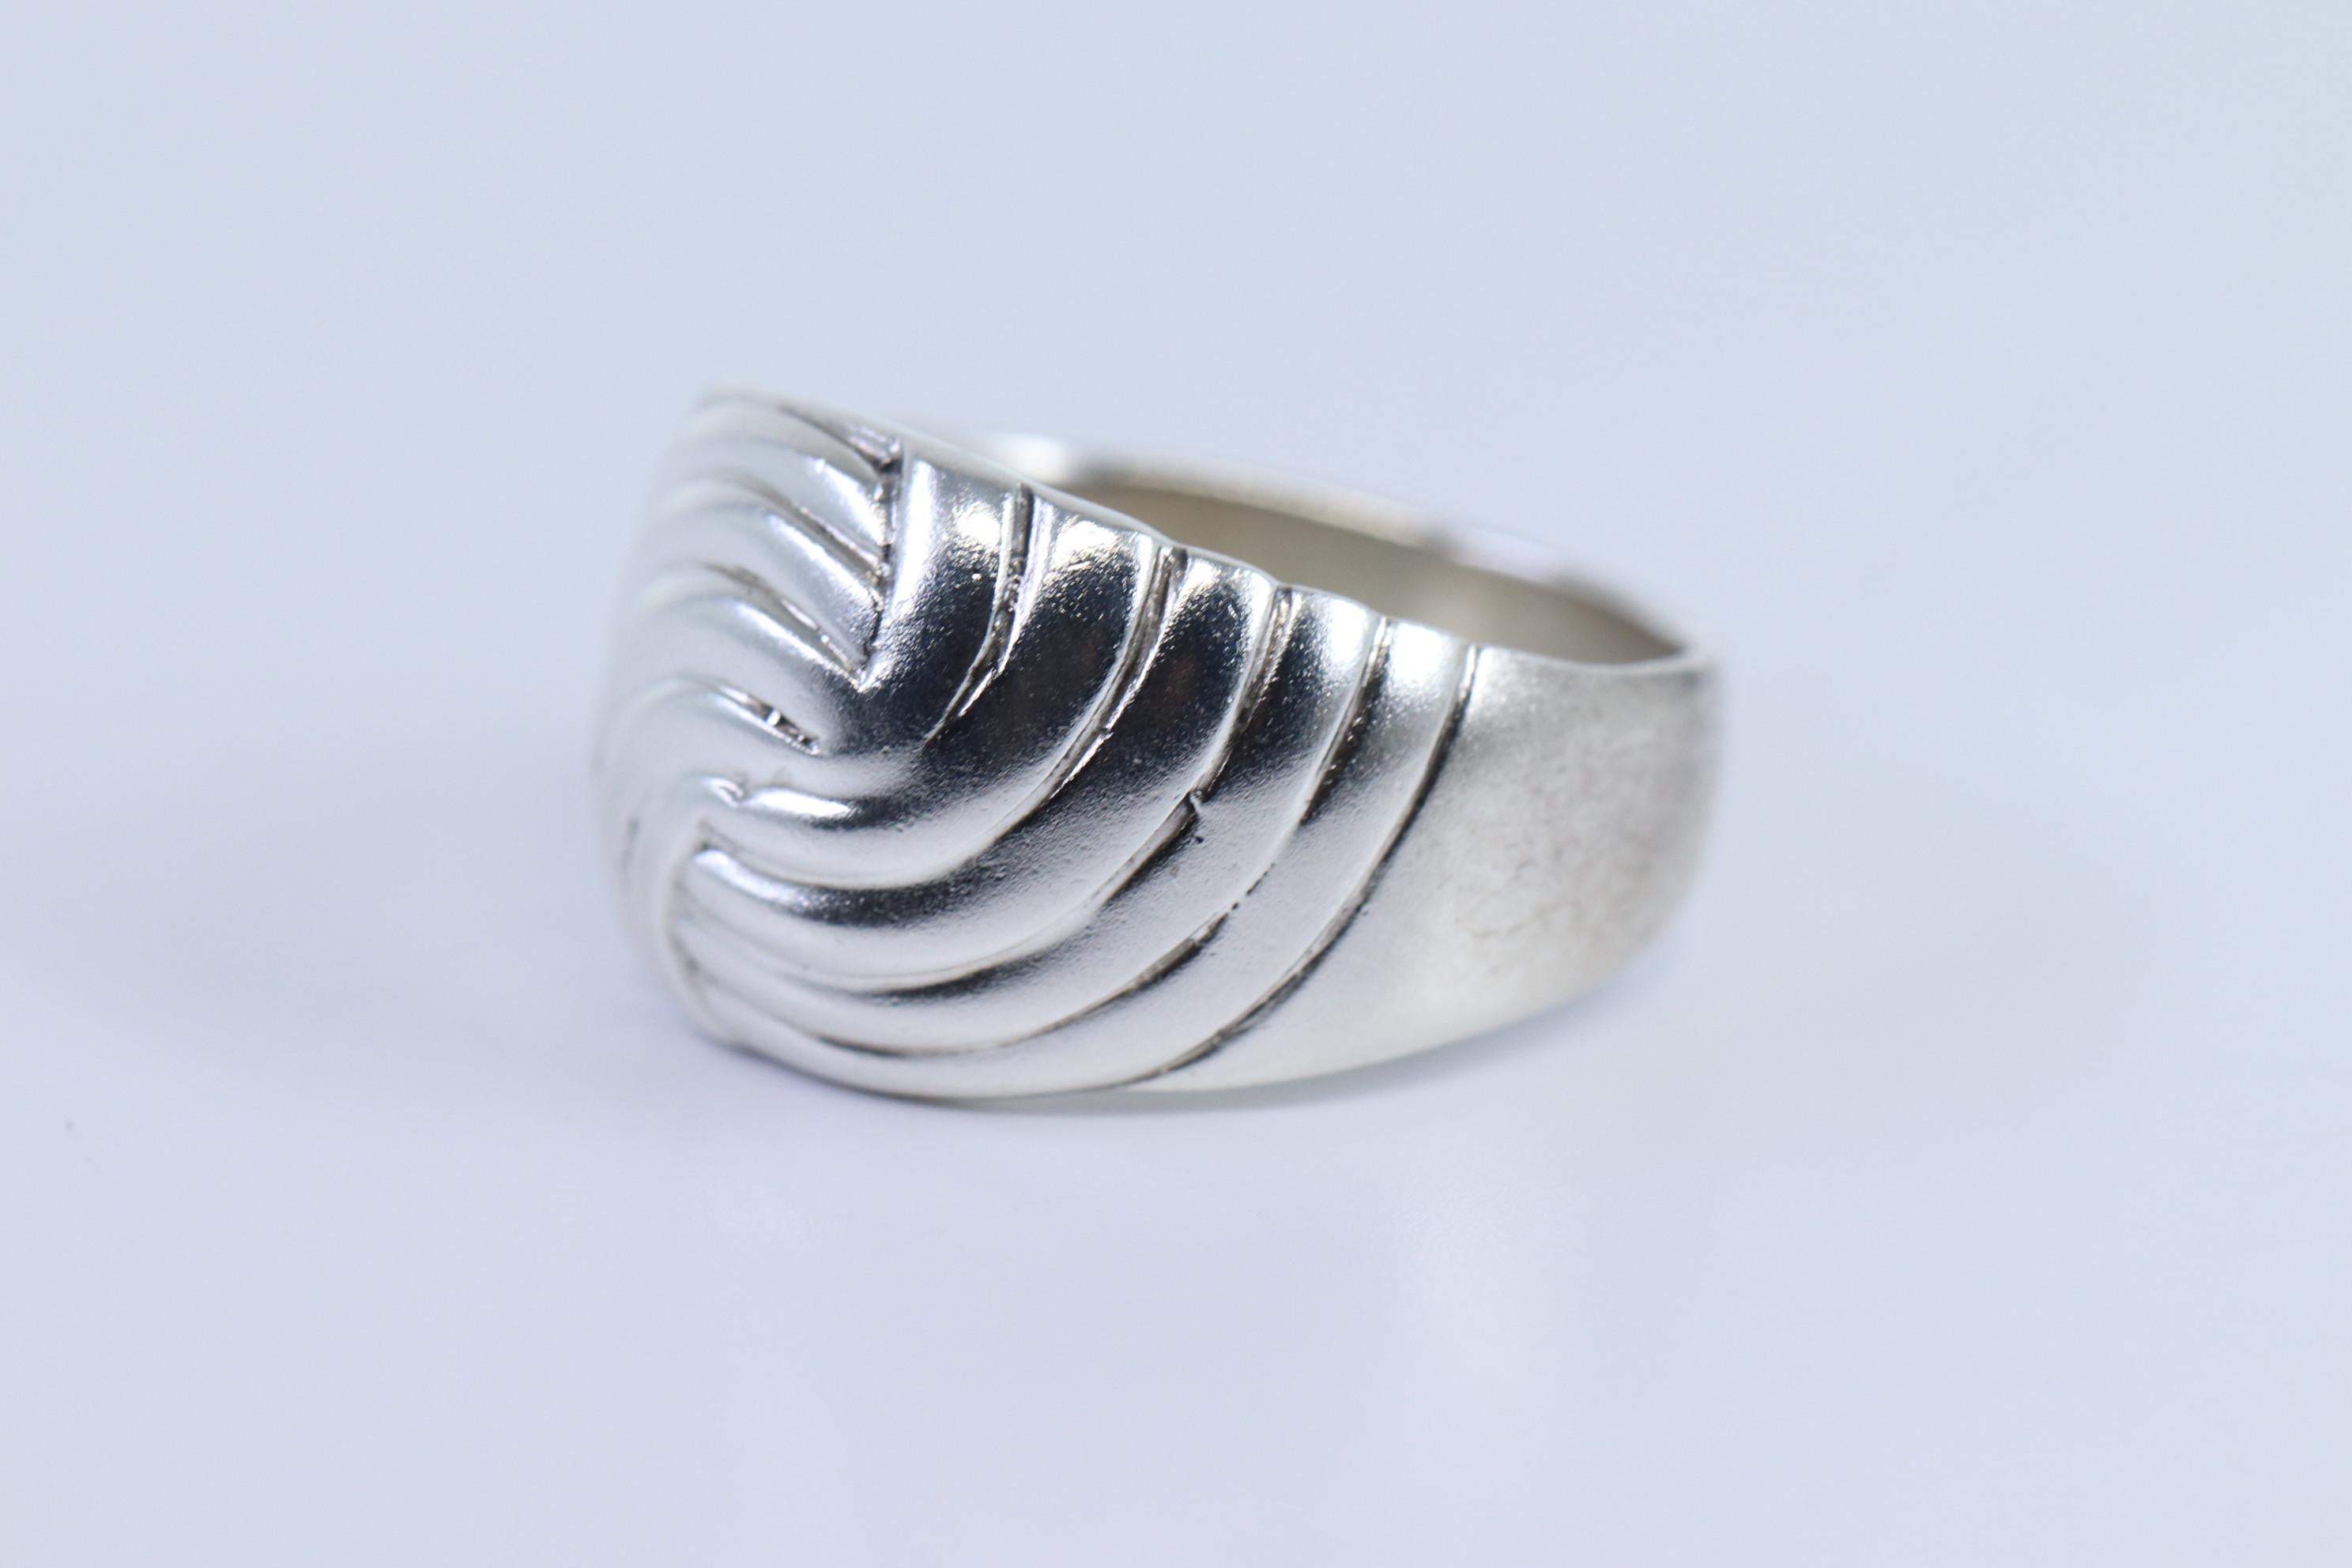 Vintage Sterling Silver Wave Ring Size 6.5 - Shop Thrifty Treasures